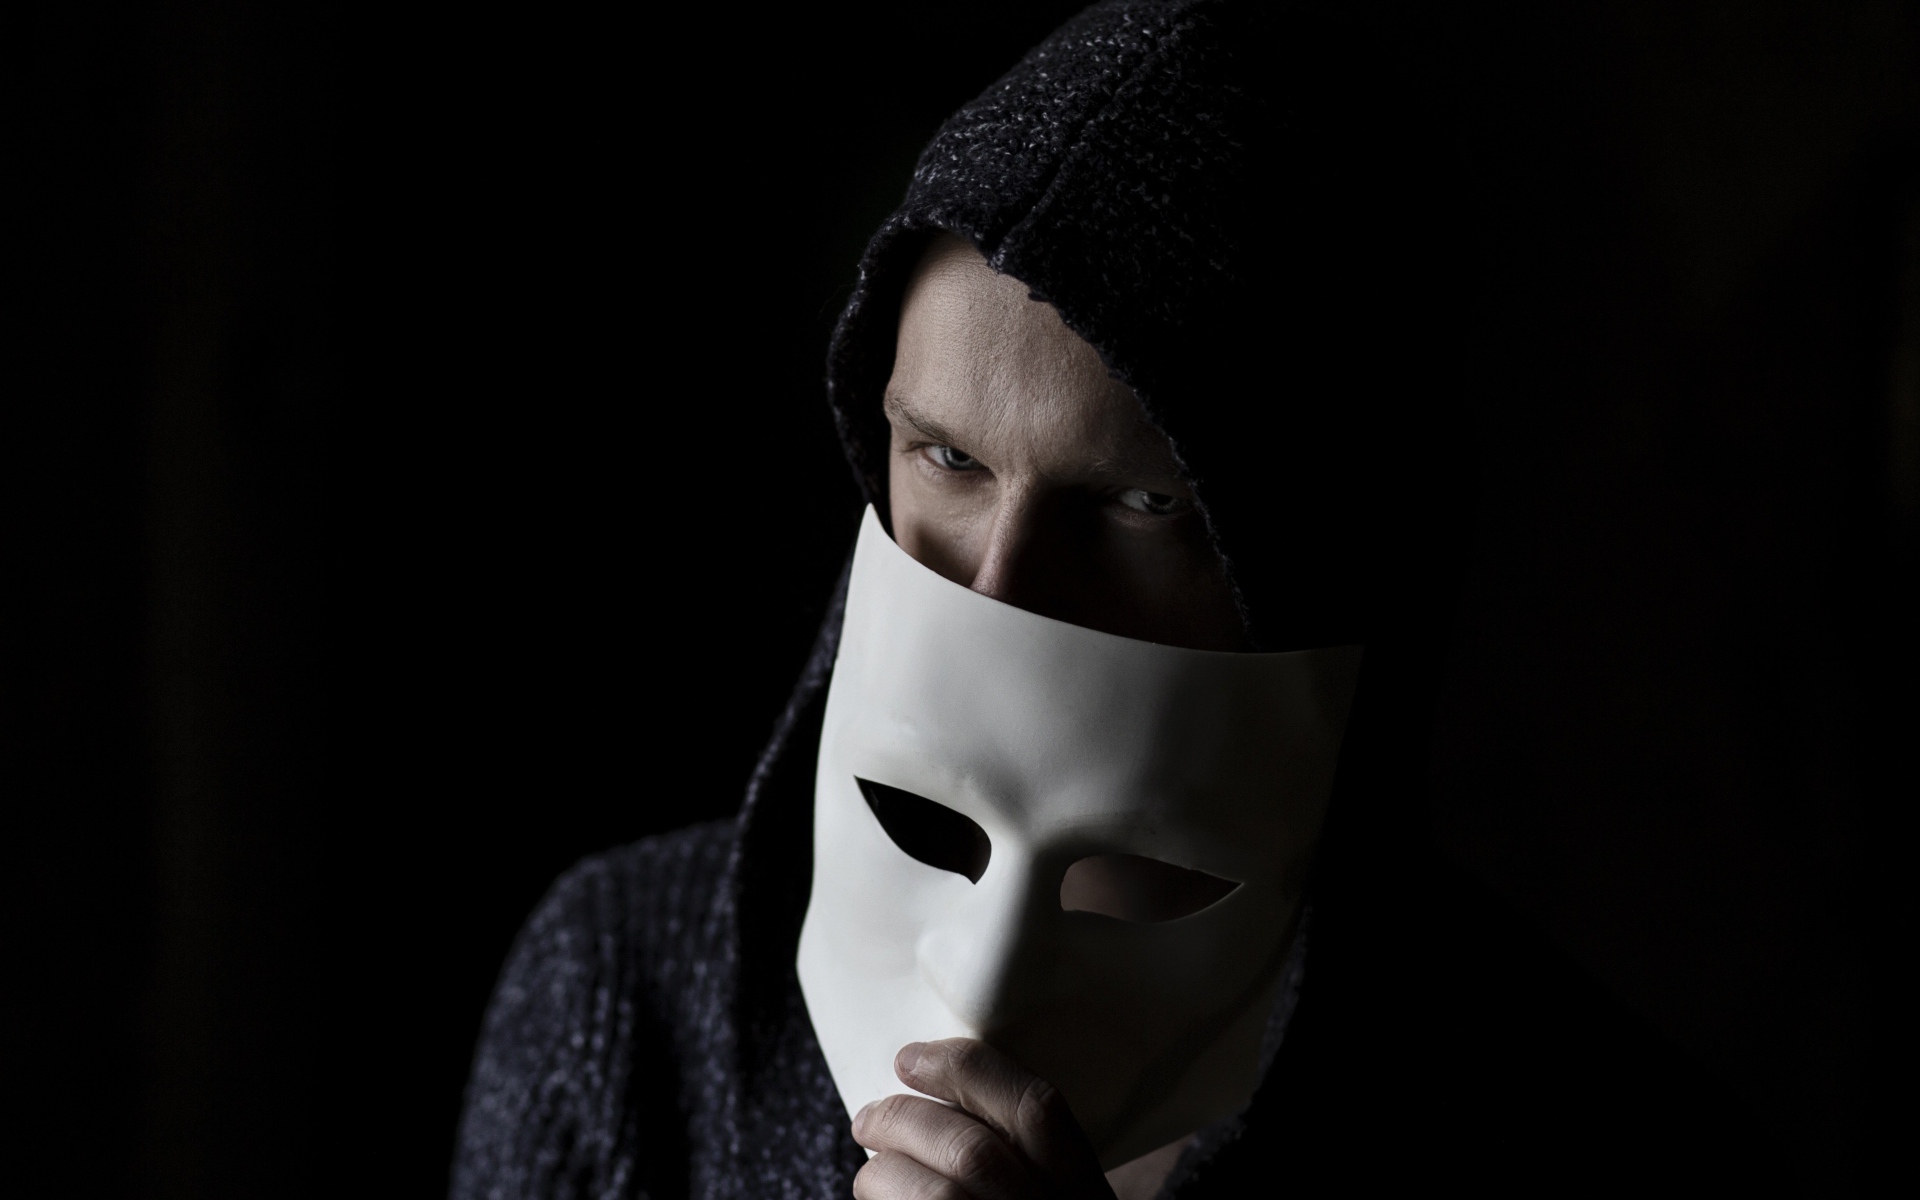 A man covers his face with a white mask on a black background